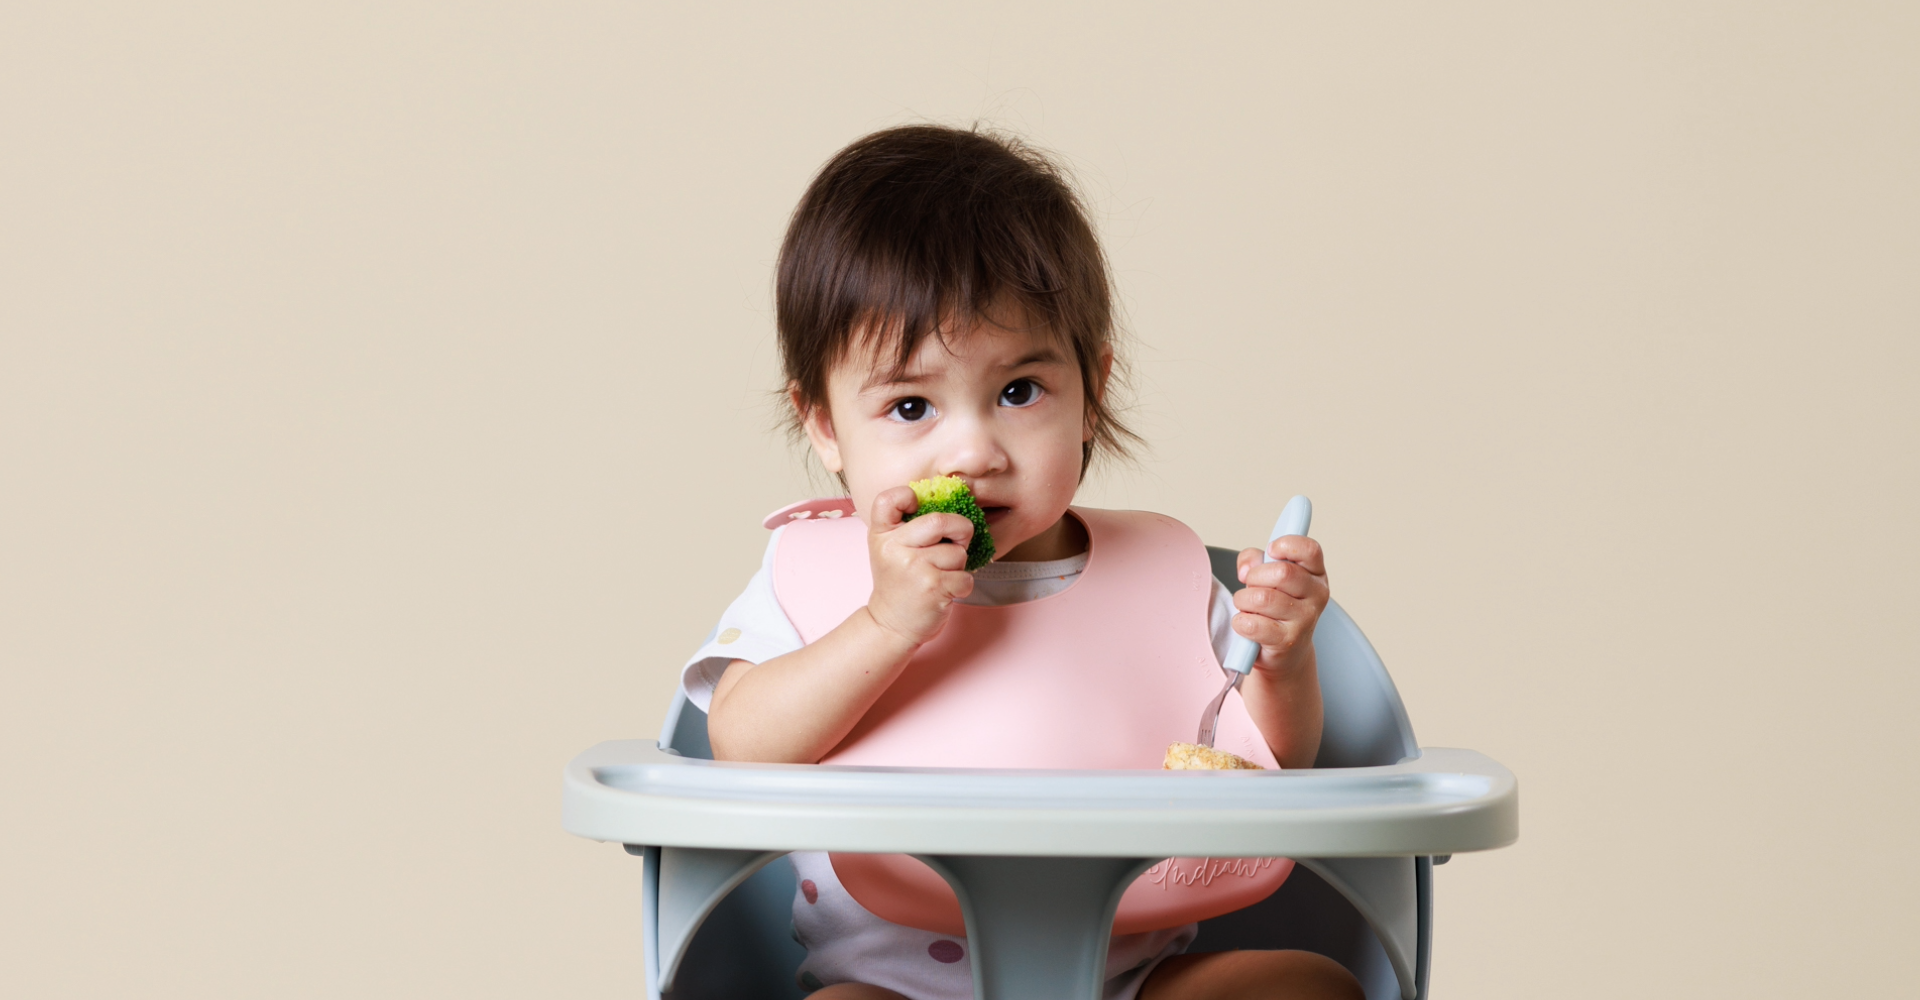 Top 3 tips to help your littles ones eat more veg